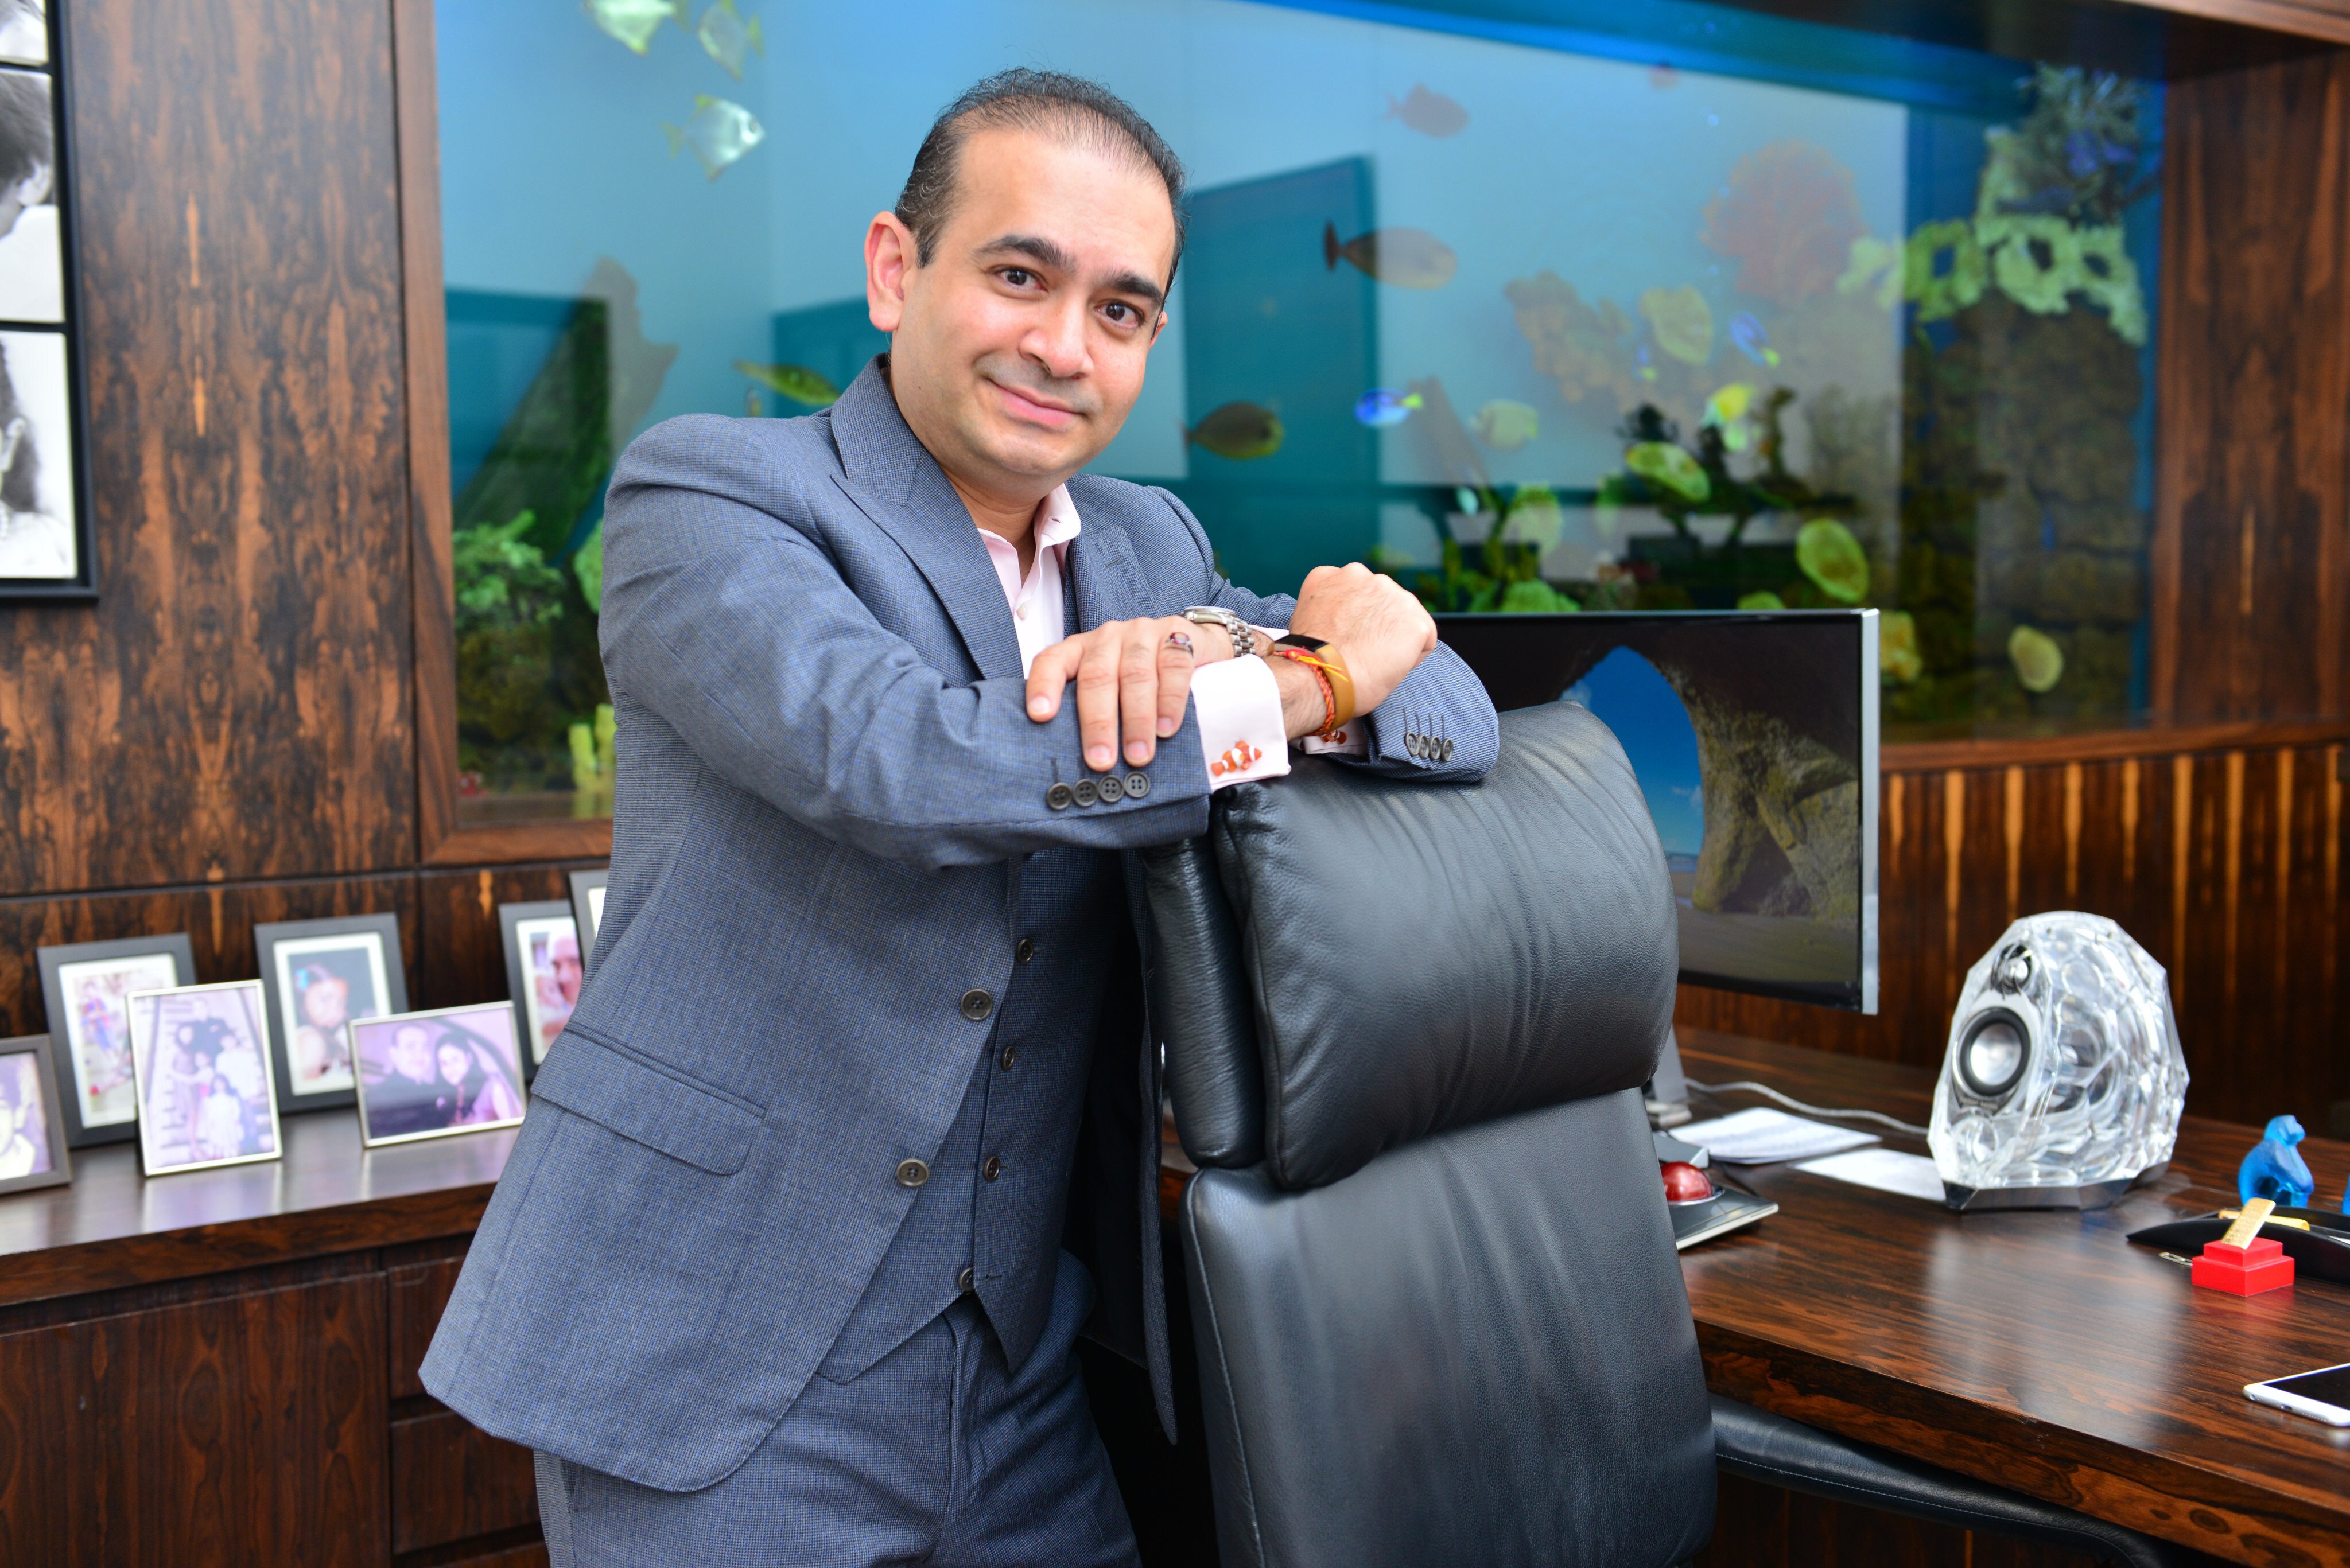 Nirav Modi, founder of the Nirav Modi chain of jewellery stores, is in jail in England, awaiting extradition to India to face charges of fraud while his collection of luxury goods has been auctioned off. Photo: Mint via Getty Images